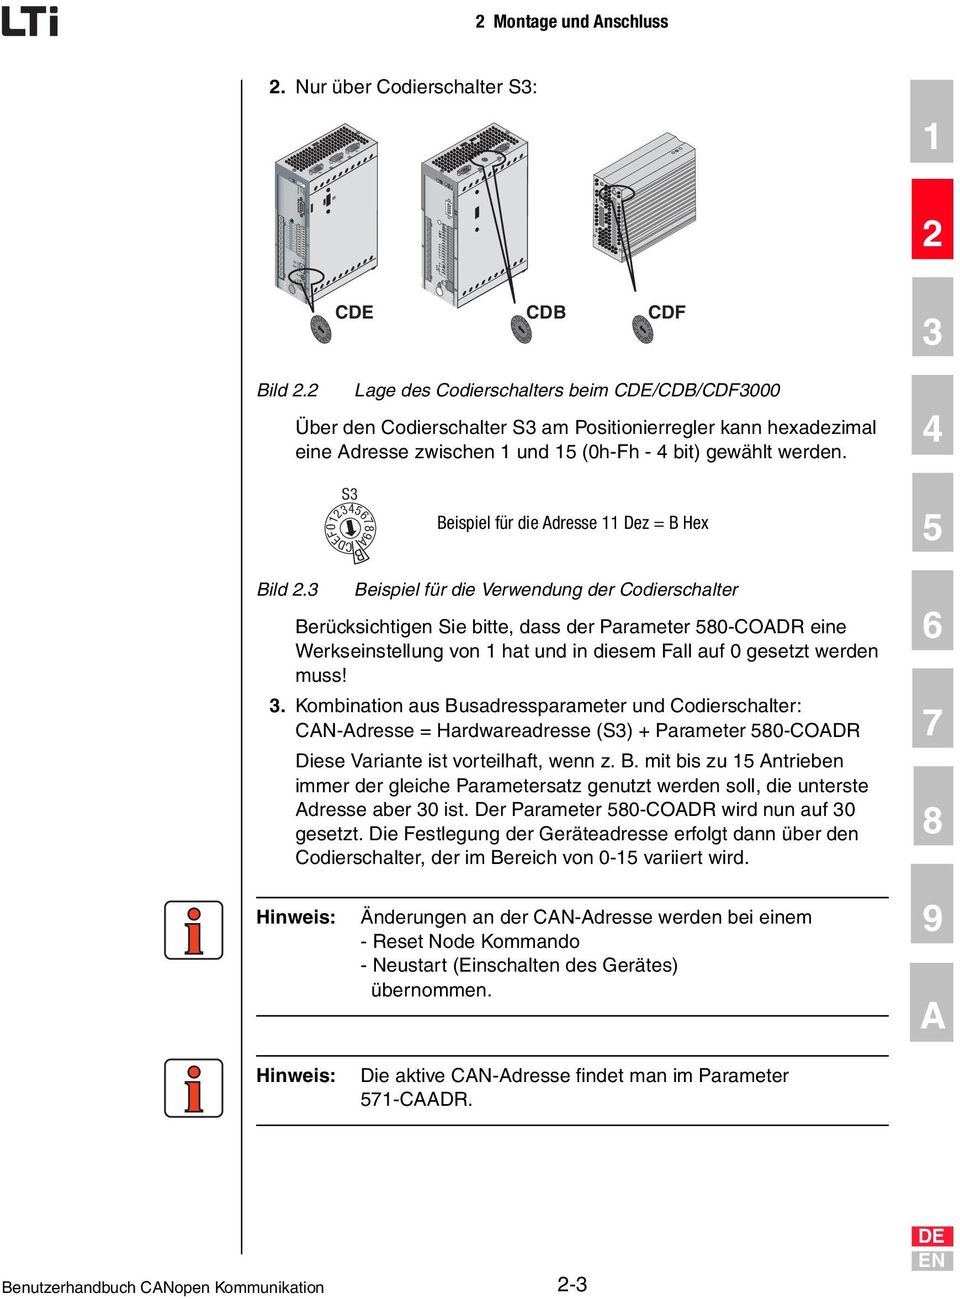 Nur über Codierschalter S3: X5 X6 X7 X5 X7 X8 WARNING Capacitor discharge time > 3 min. Pay attention to the operation manual! 3 456789ABCDEF0 CDE WARNING Capacitor discharge time > 3 min.